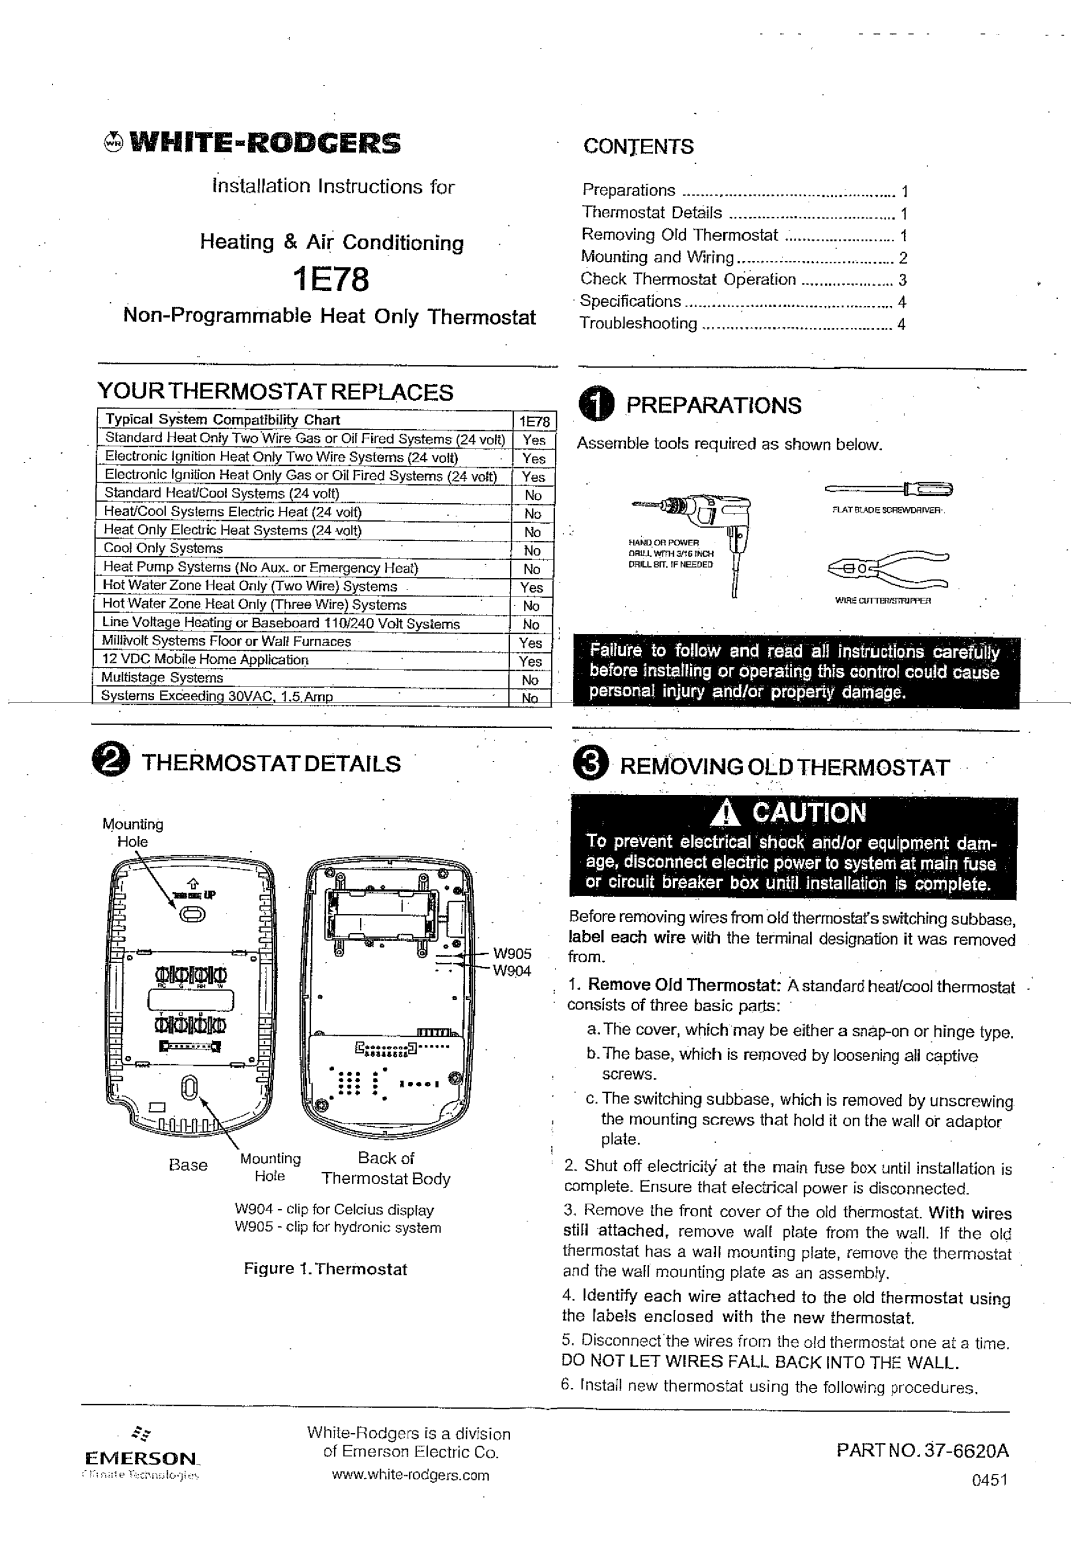 White Rodgers 1.00E+78 installation instructions Your Thermostat Replaces, Contents, Preparations, Thermostat Details 